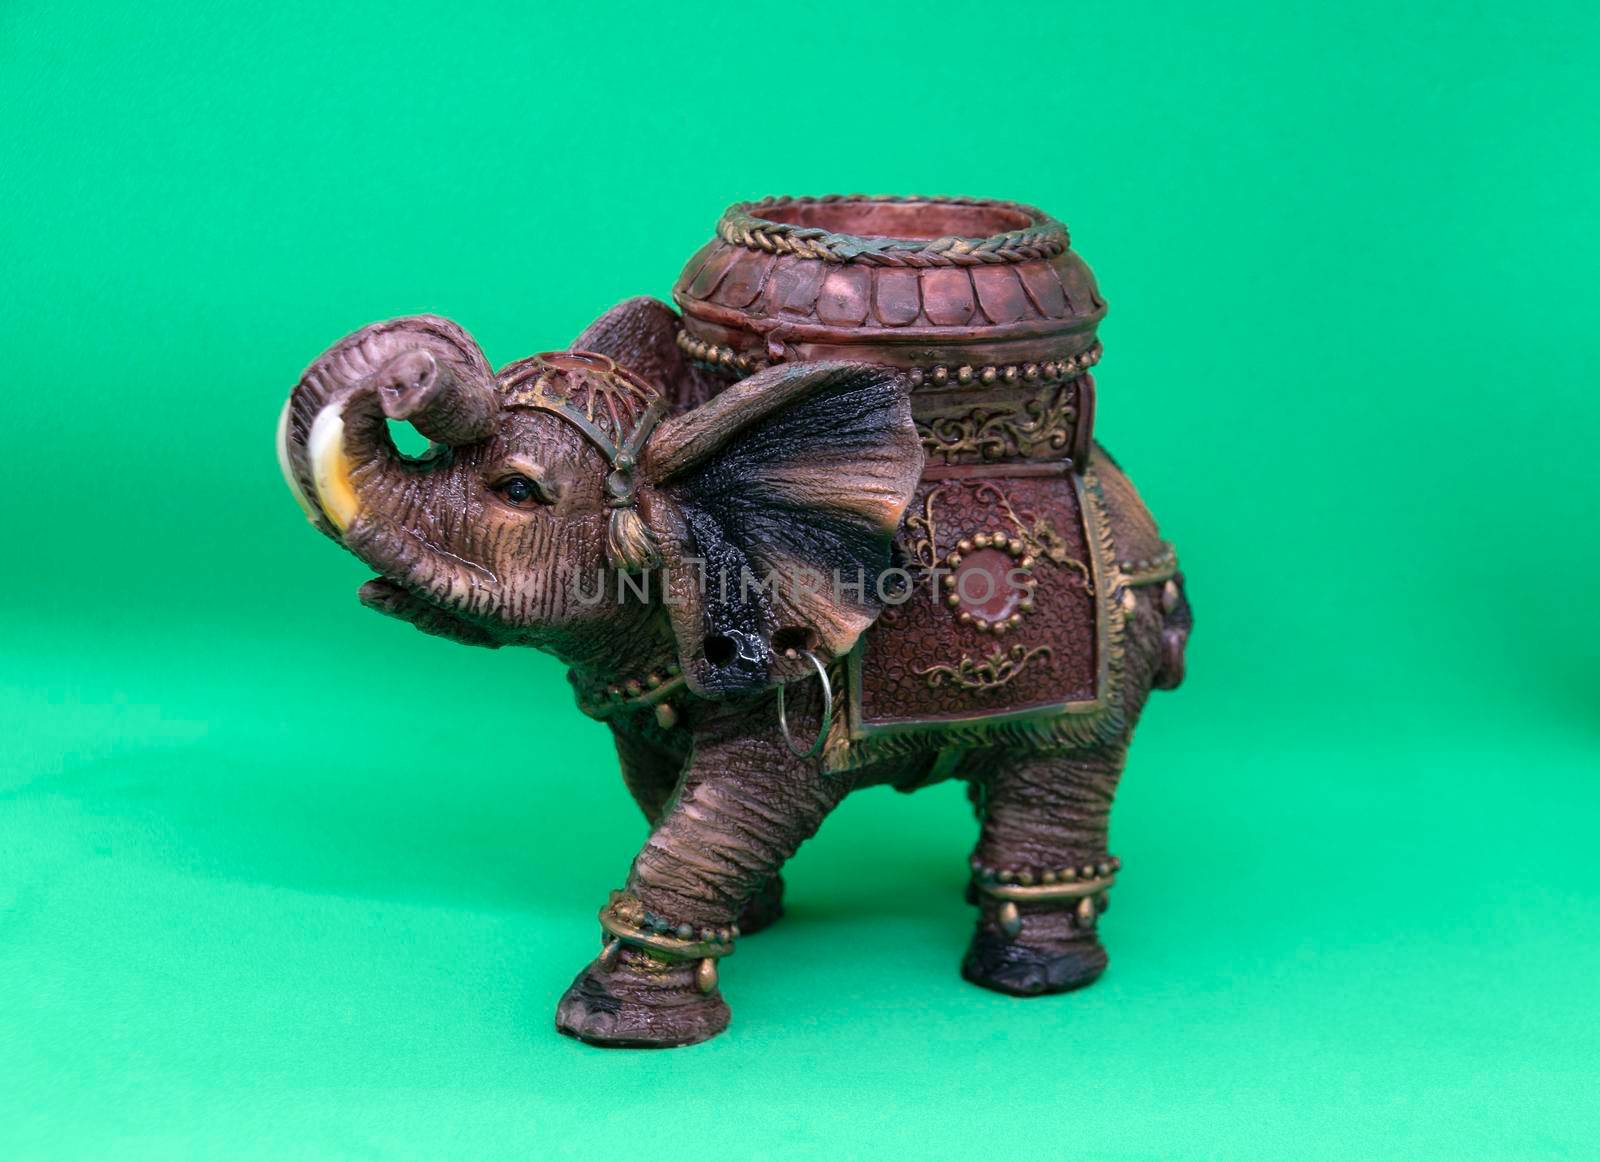 Figurine of an Indian elephant on a green background close-up. Candlestick in the shape of an Indian elephant.